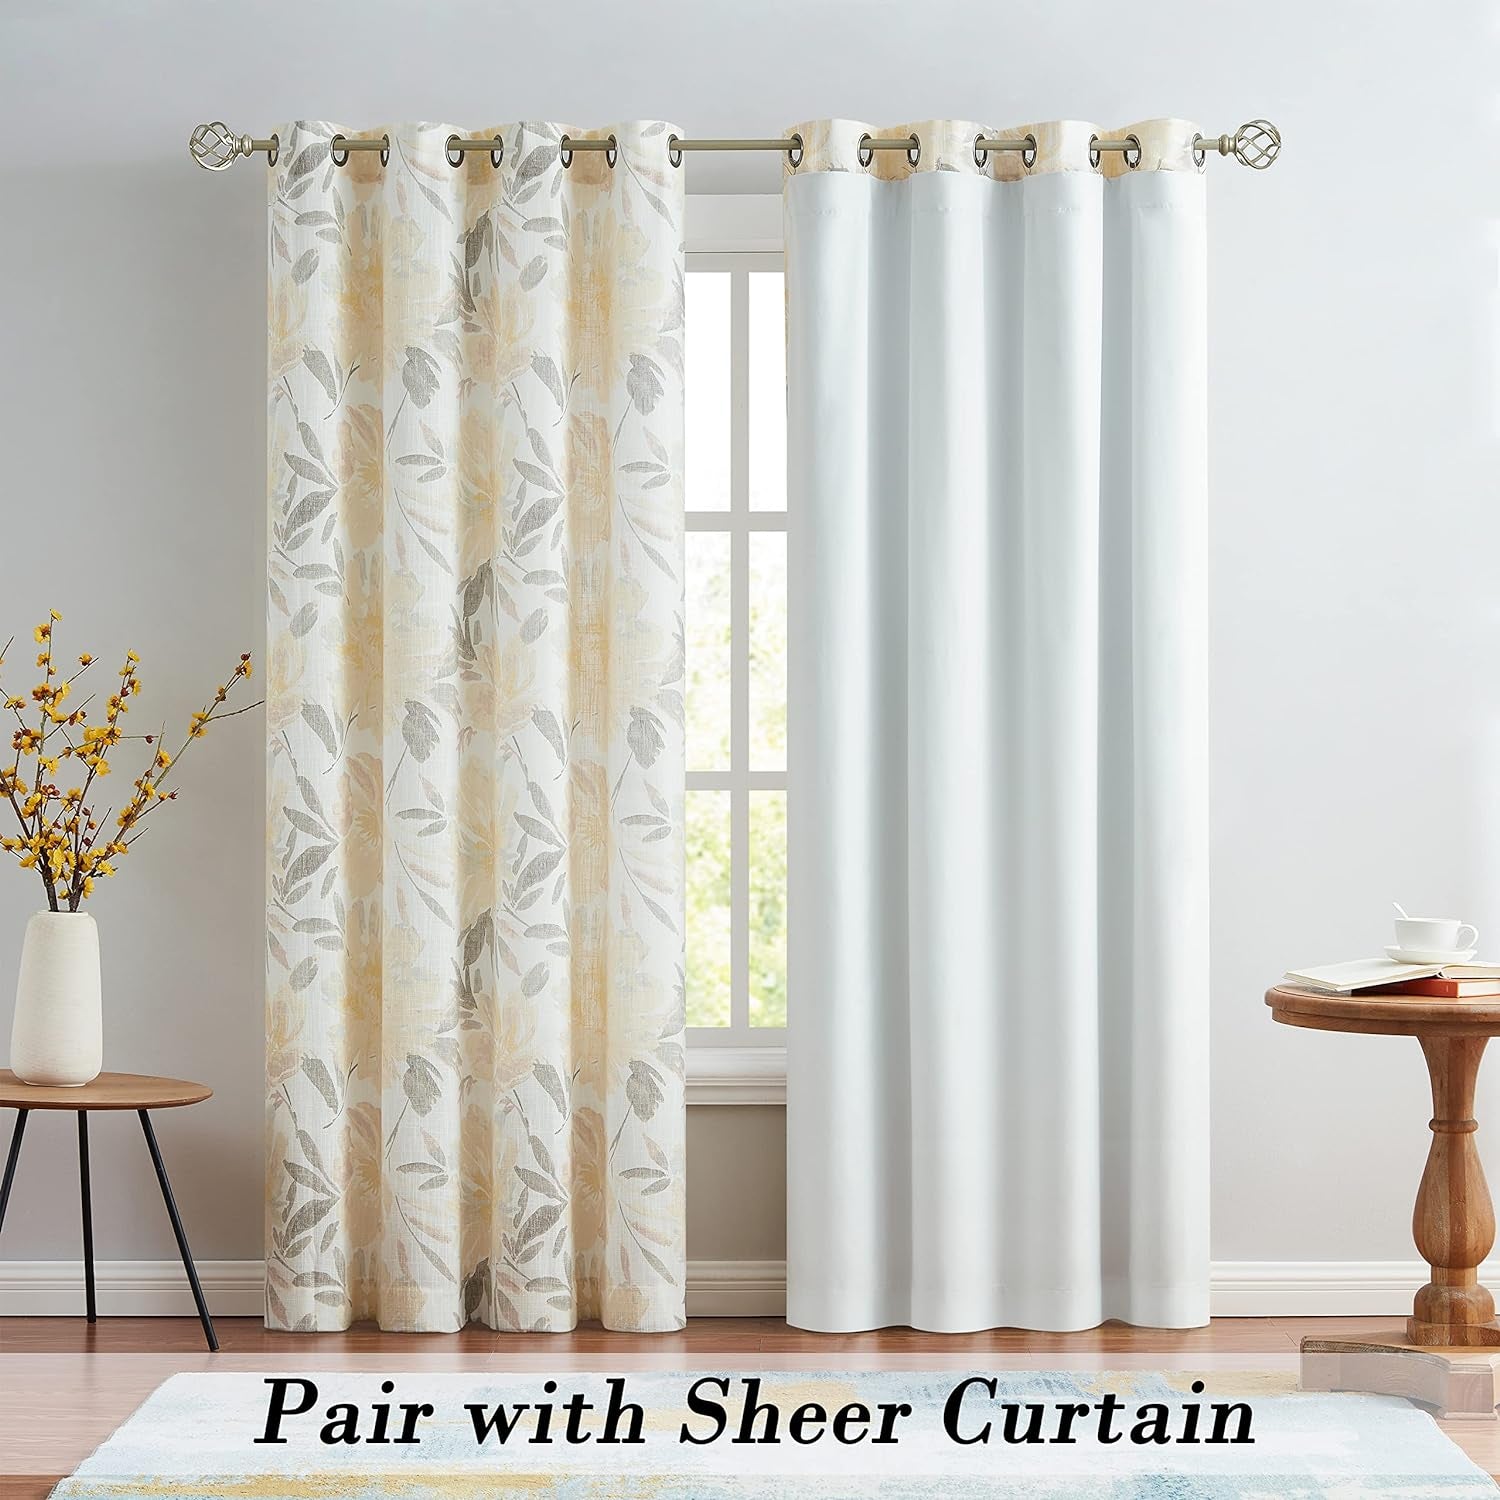 WEST LAKE Solid White Blackout Curtain Liner 100 Light Blocking Panels Thermal Insulated Rod Pocket Window Drapes for Living Room Bedroom Winter Curtain Liner for Grommet Top Panels,48" Wx92 Lx2  WEST LAKE   